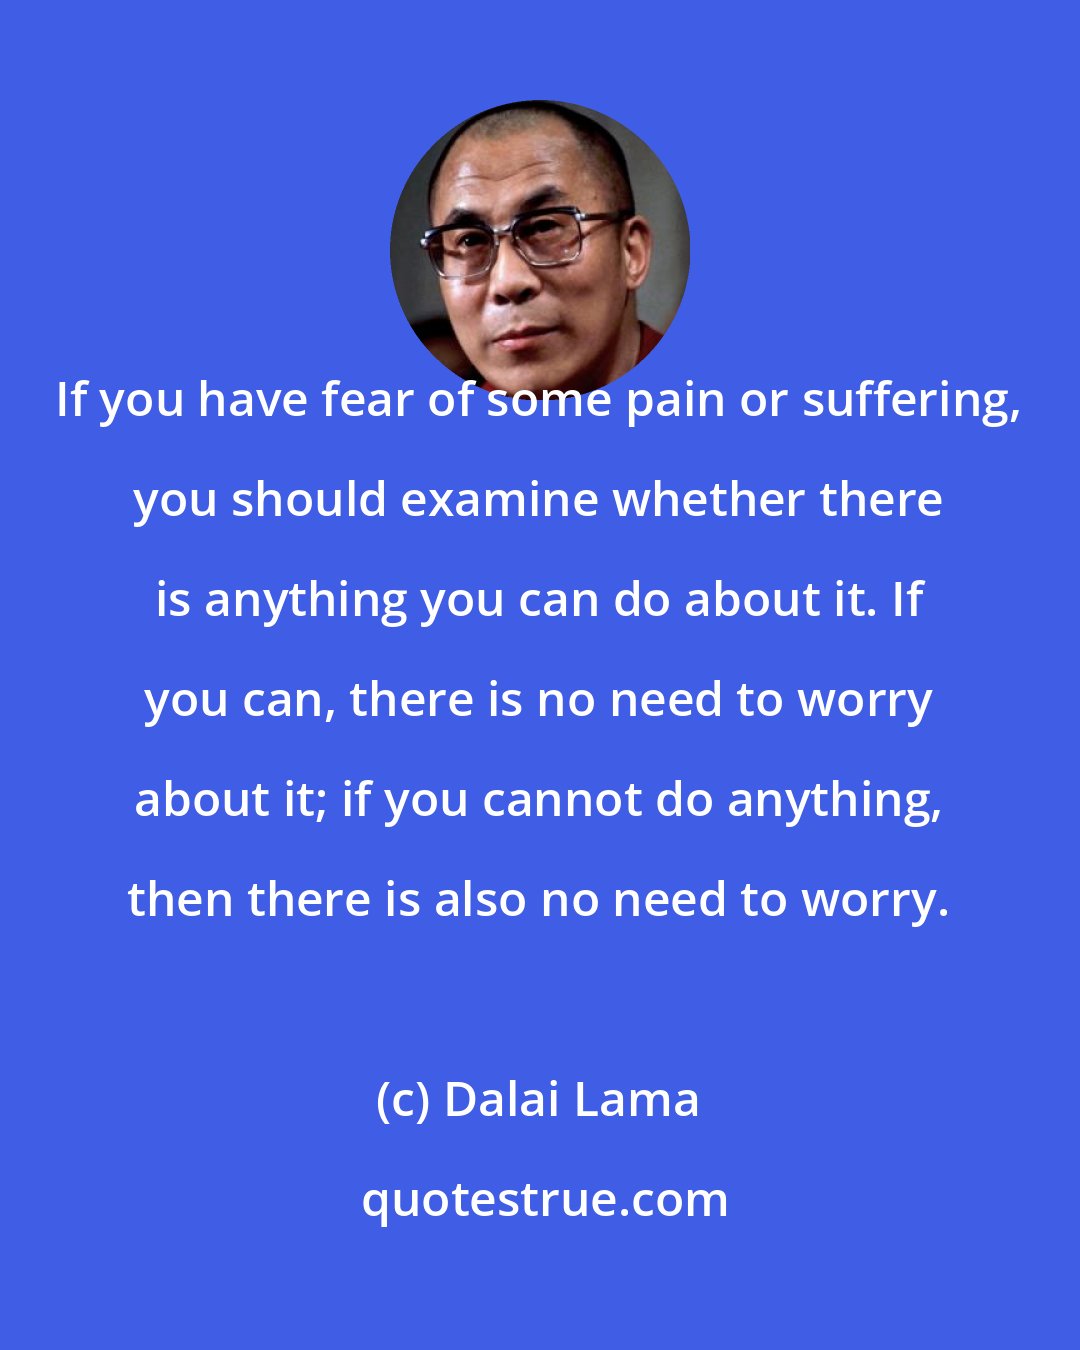 Dalai Lama: If you have fear of some pain or suffering, you should examine whether there is anything you can do about it. If you can, there is no need to worry about it; if you cannot do anything, then there is also no need to worry.